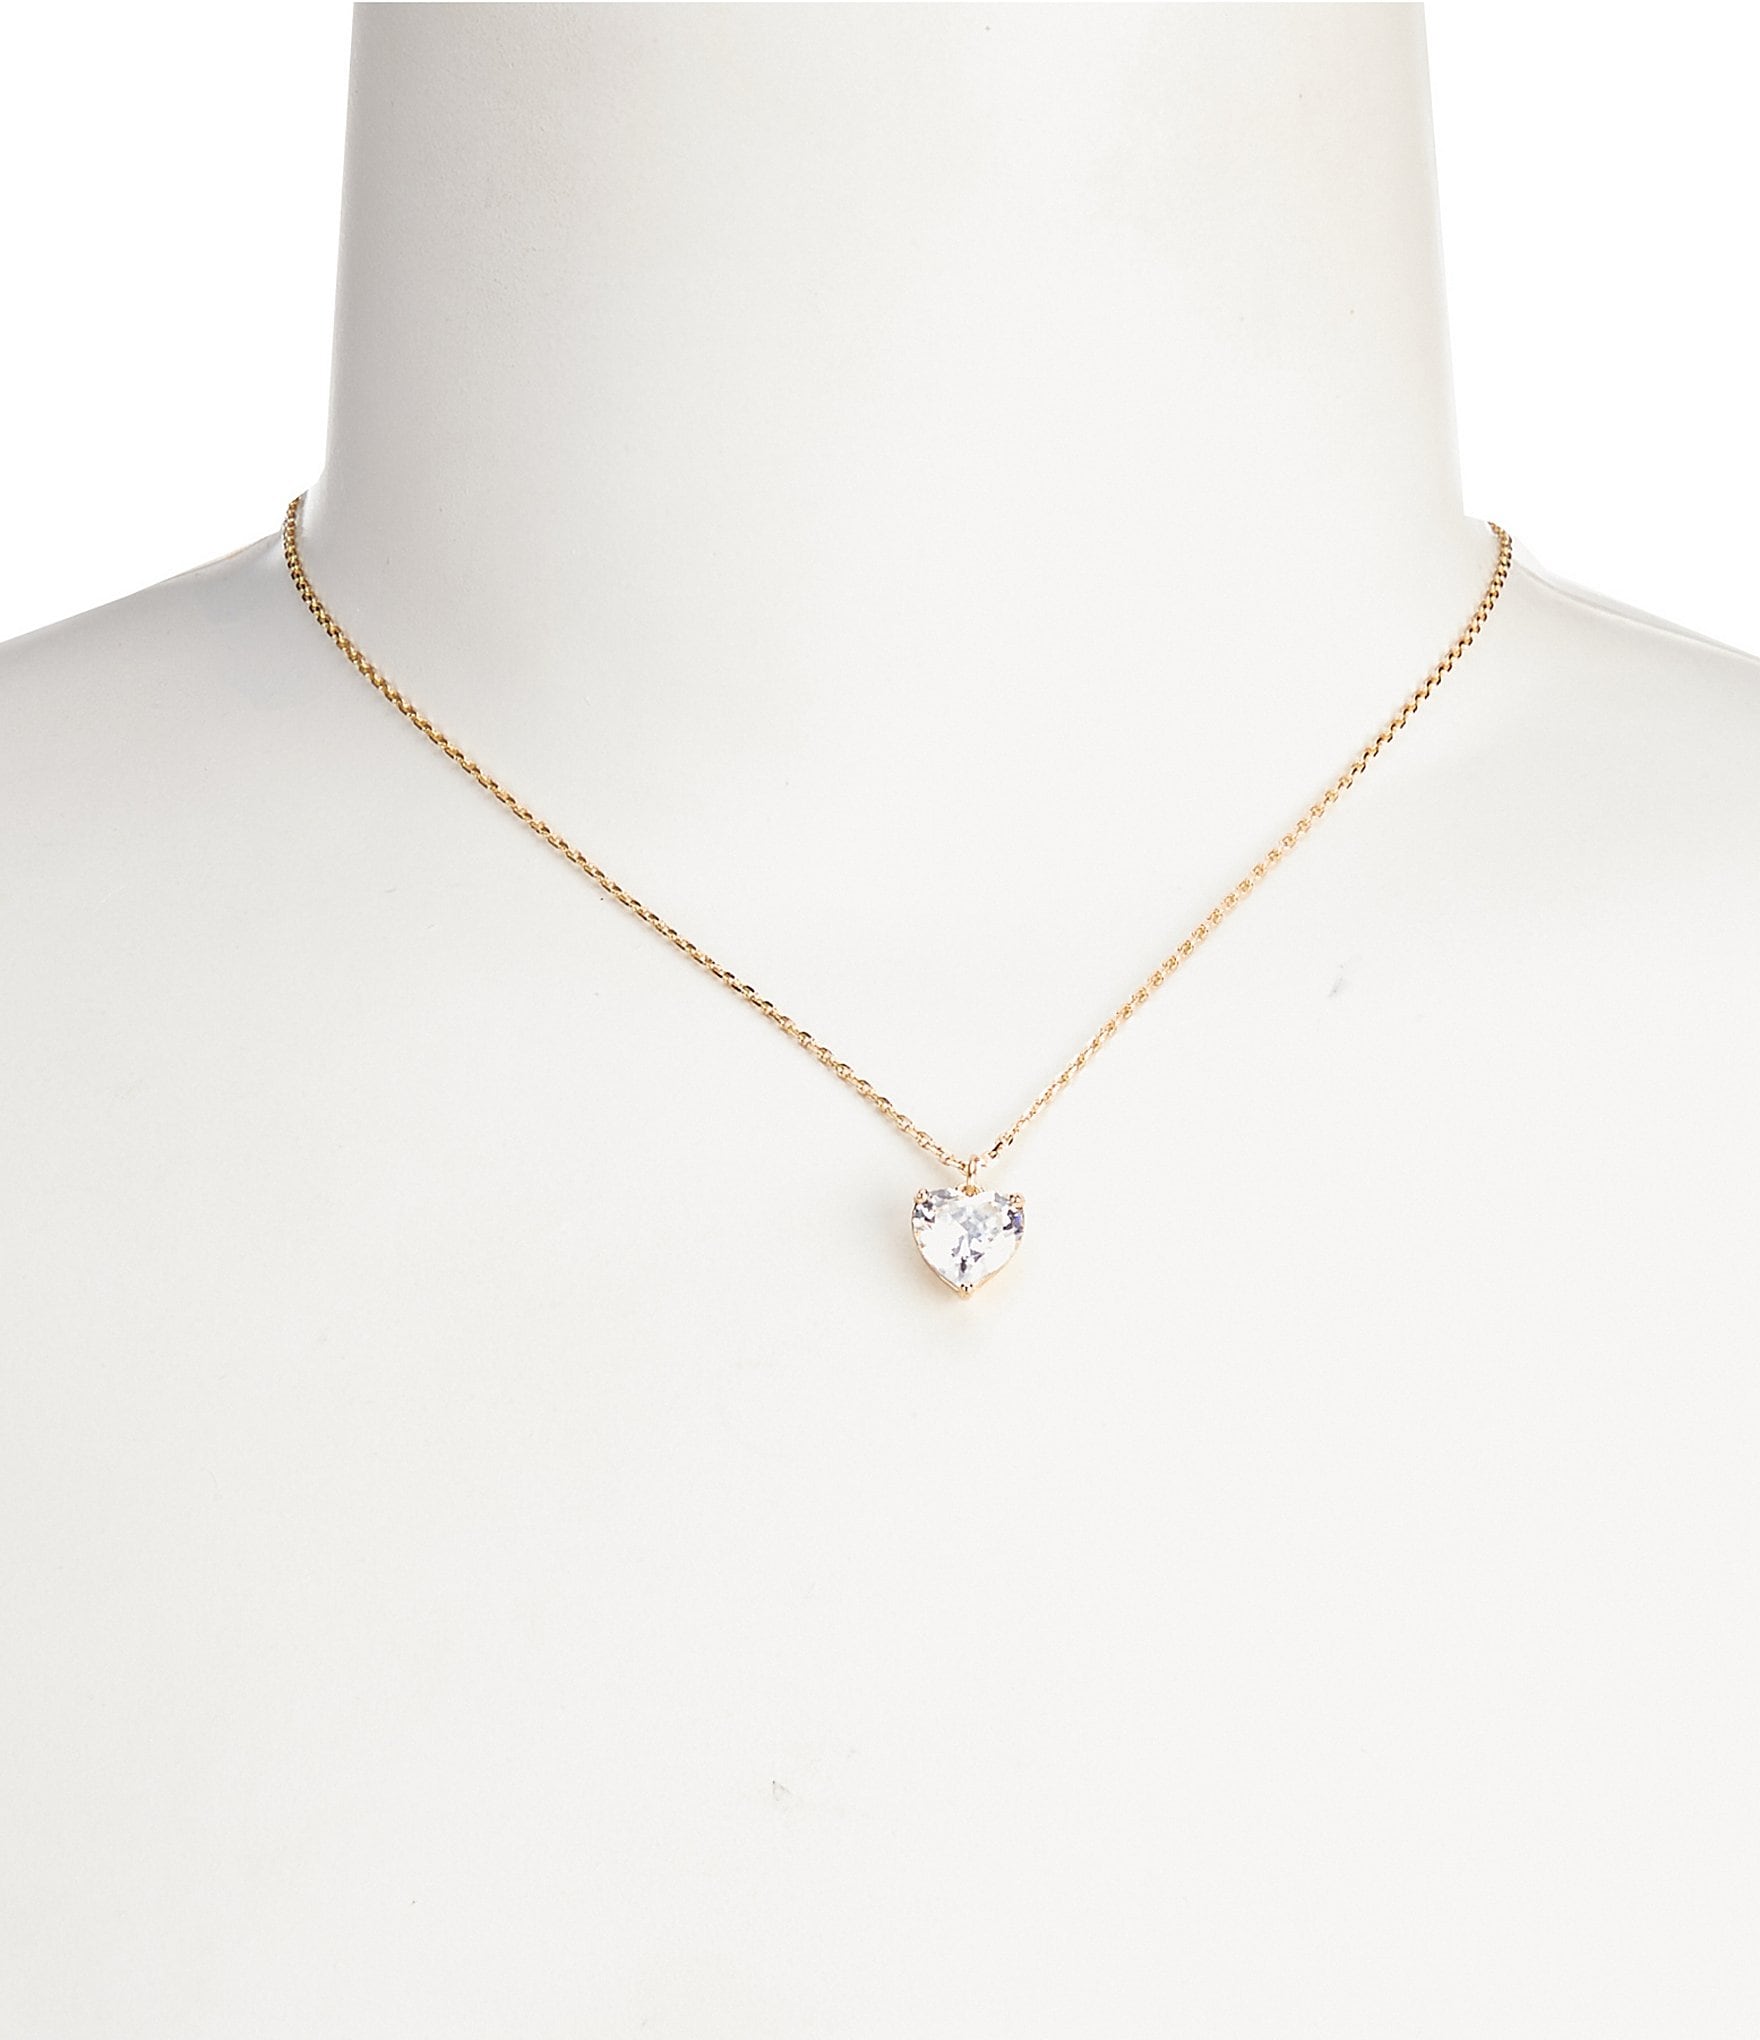 Diamond Bezel Tennis Necklace in Yellow, Rose or White Gold